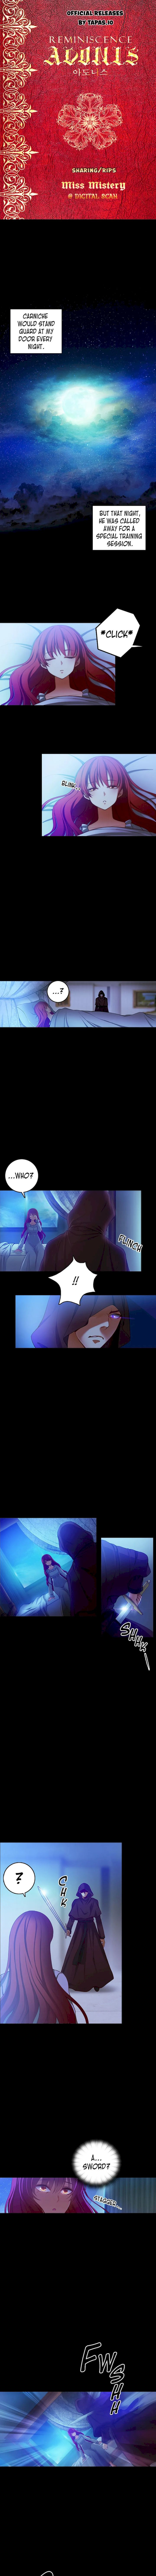 Reminiscence Adonis - Chapter 9 Page 1